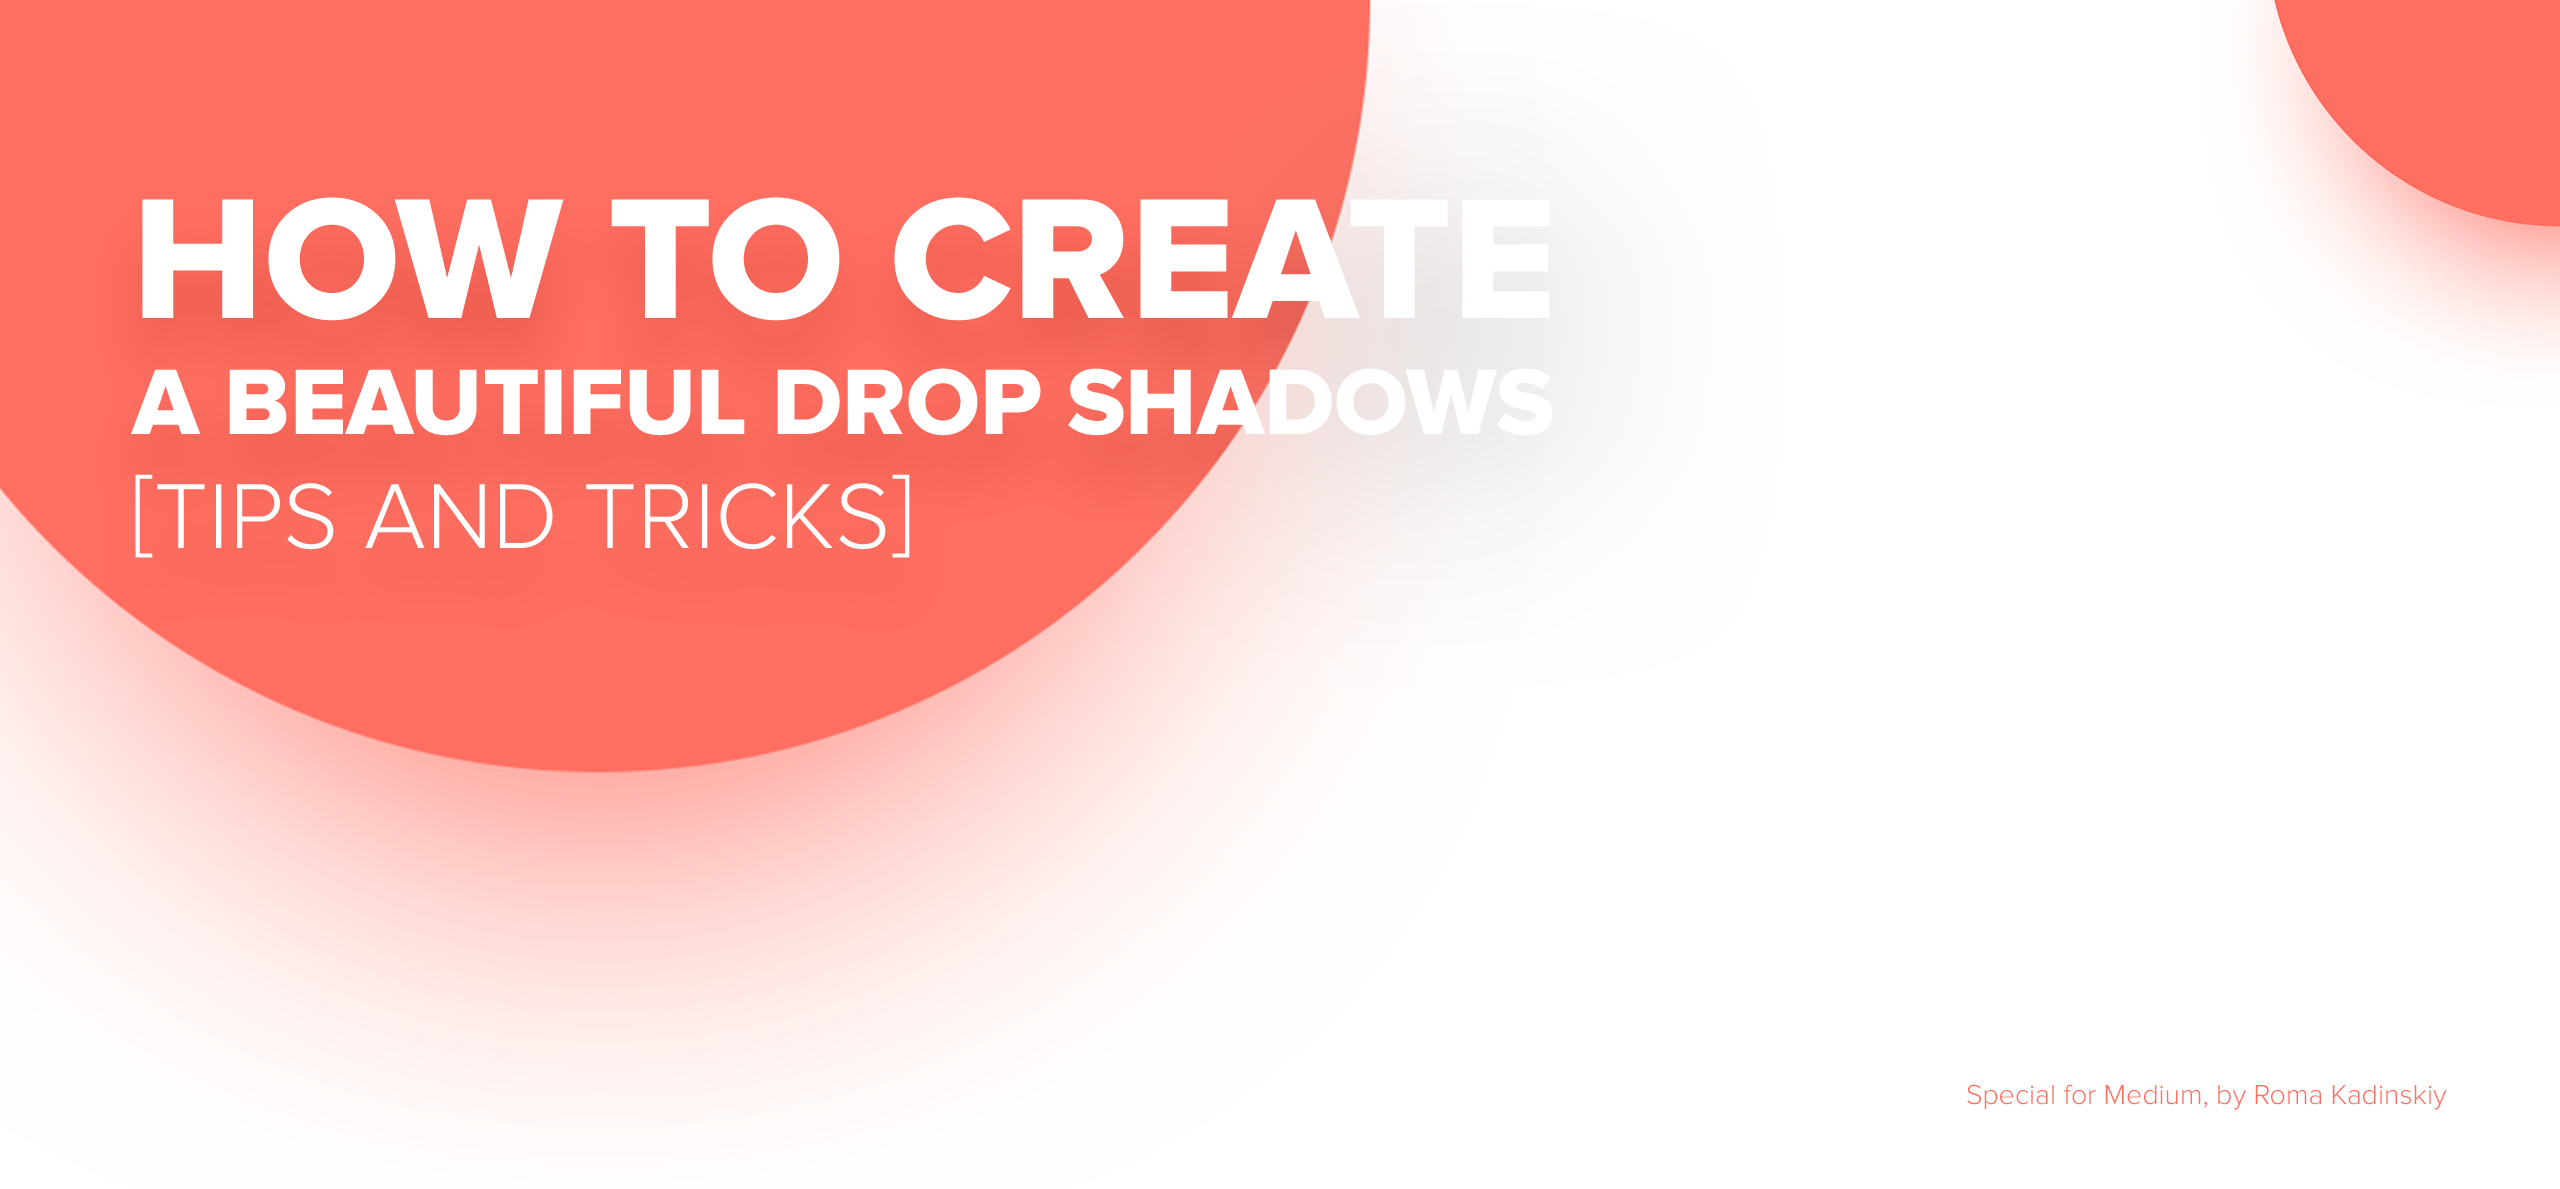 How To Create A Beautiful Drop Shadows Tips And Tricks